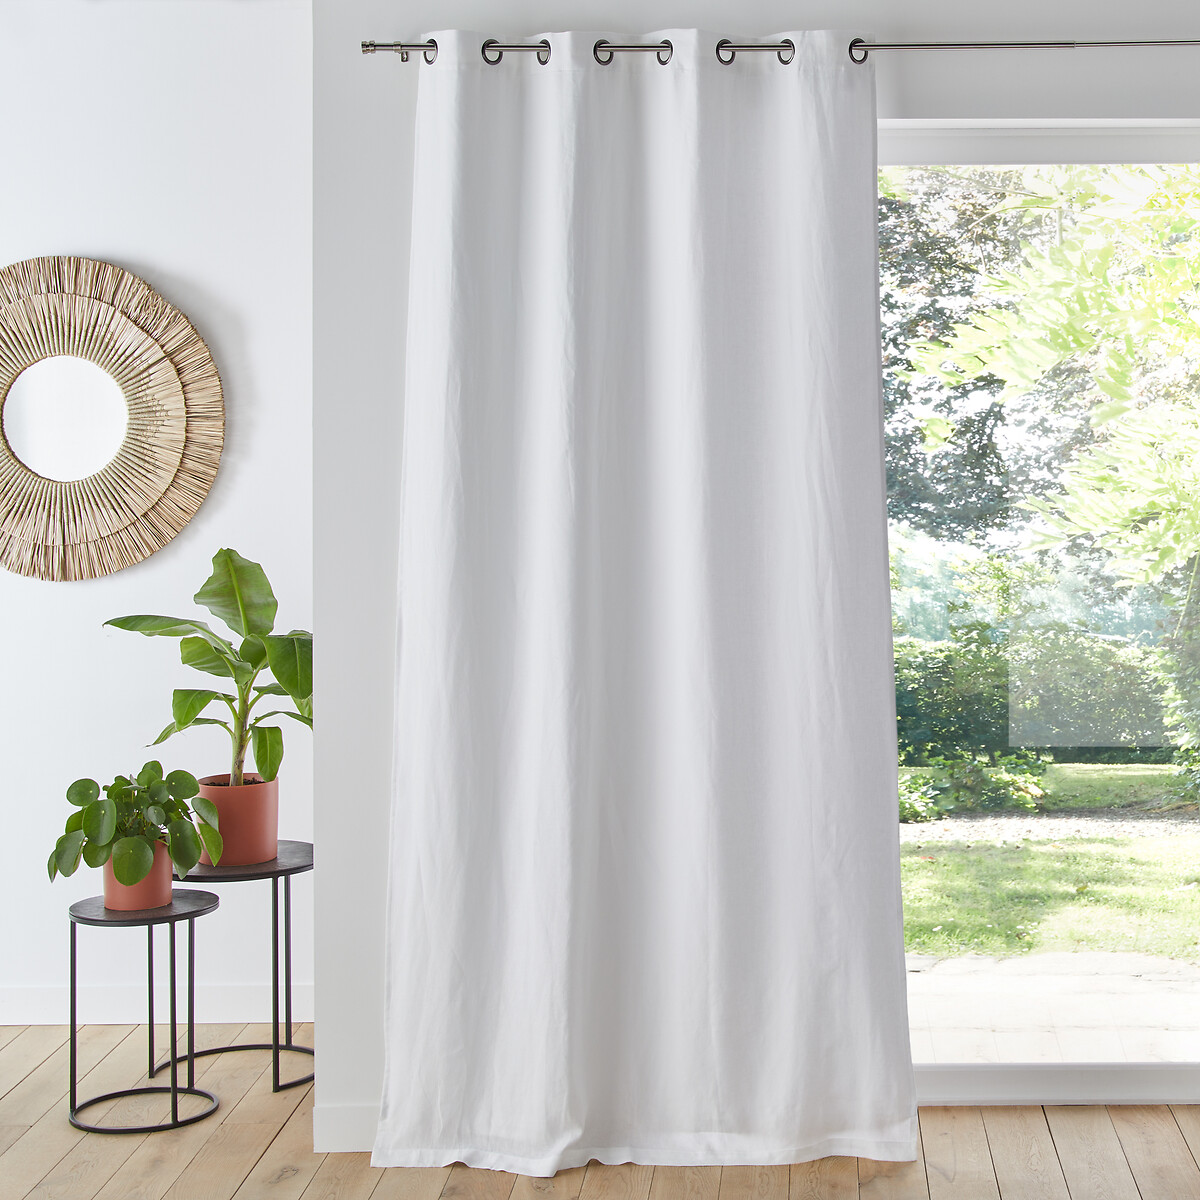 PAIR READY MADE CURTAINS STRIPED  Black Cream White VOILE EYELET RING. SALE!! 